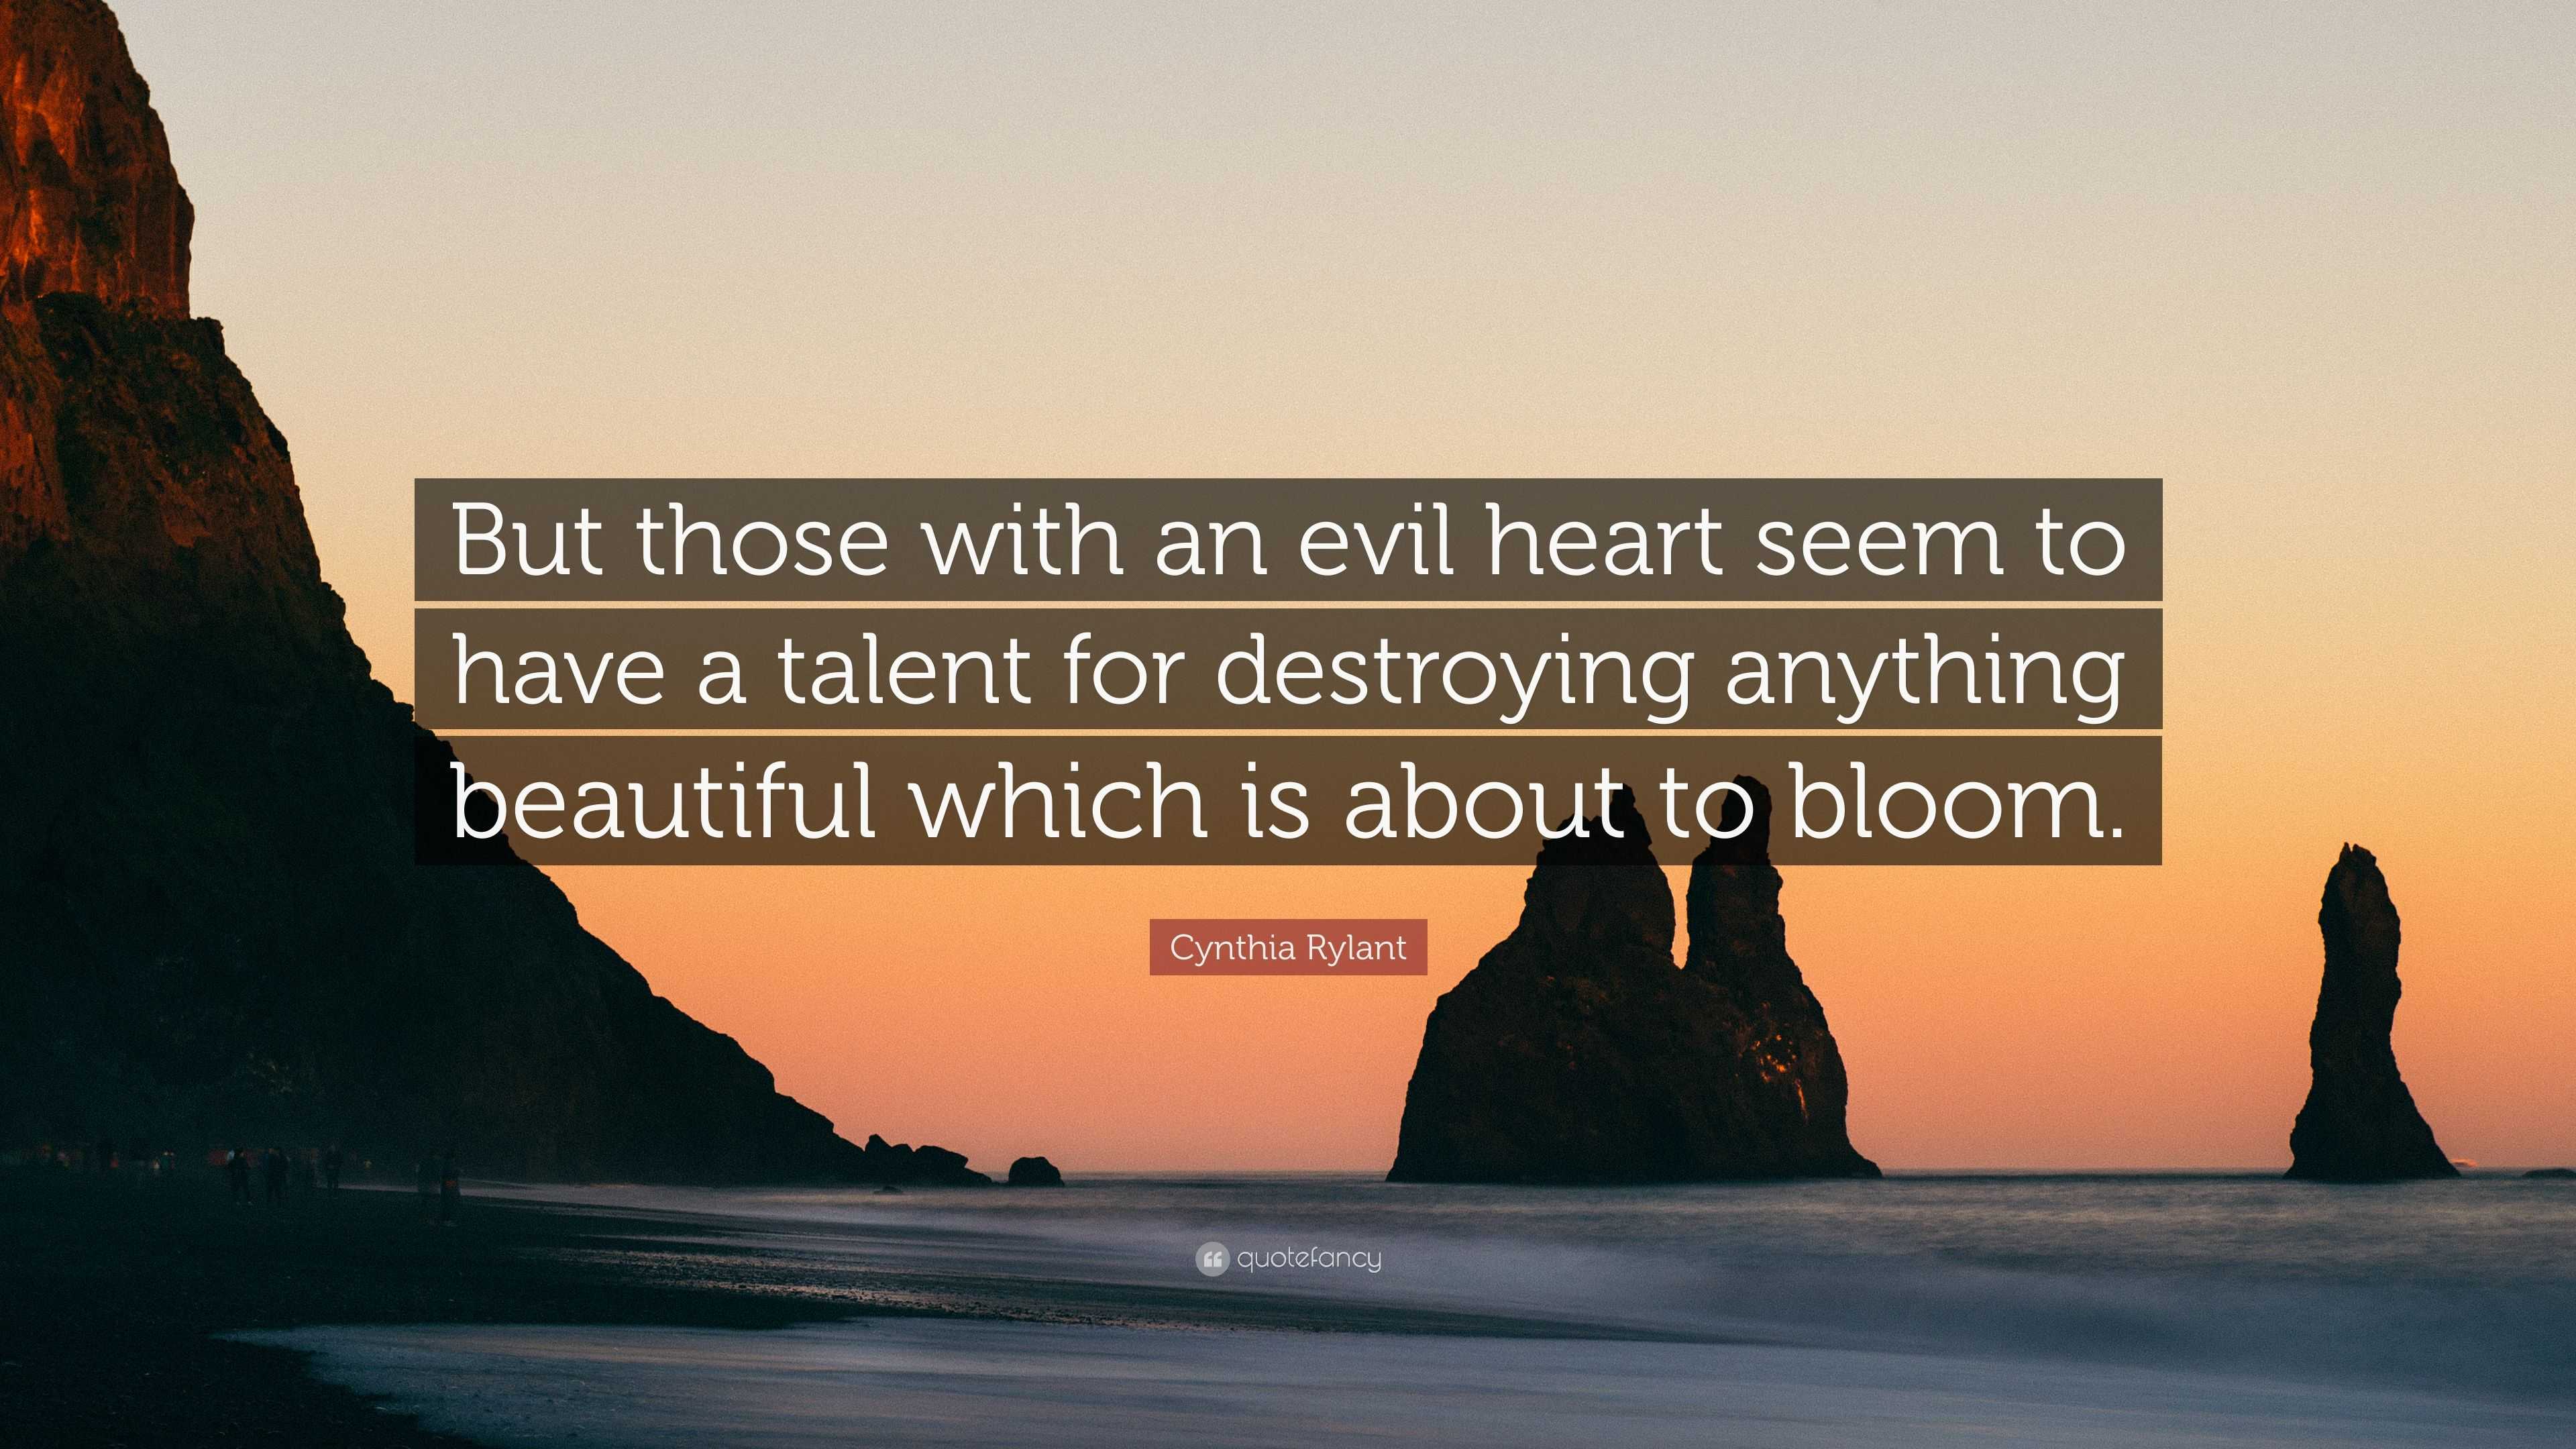 Cynthia Rylant Quote: “But those with an evil heart seem to have a ...